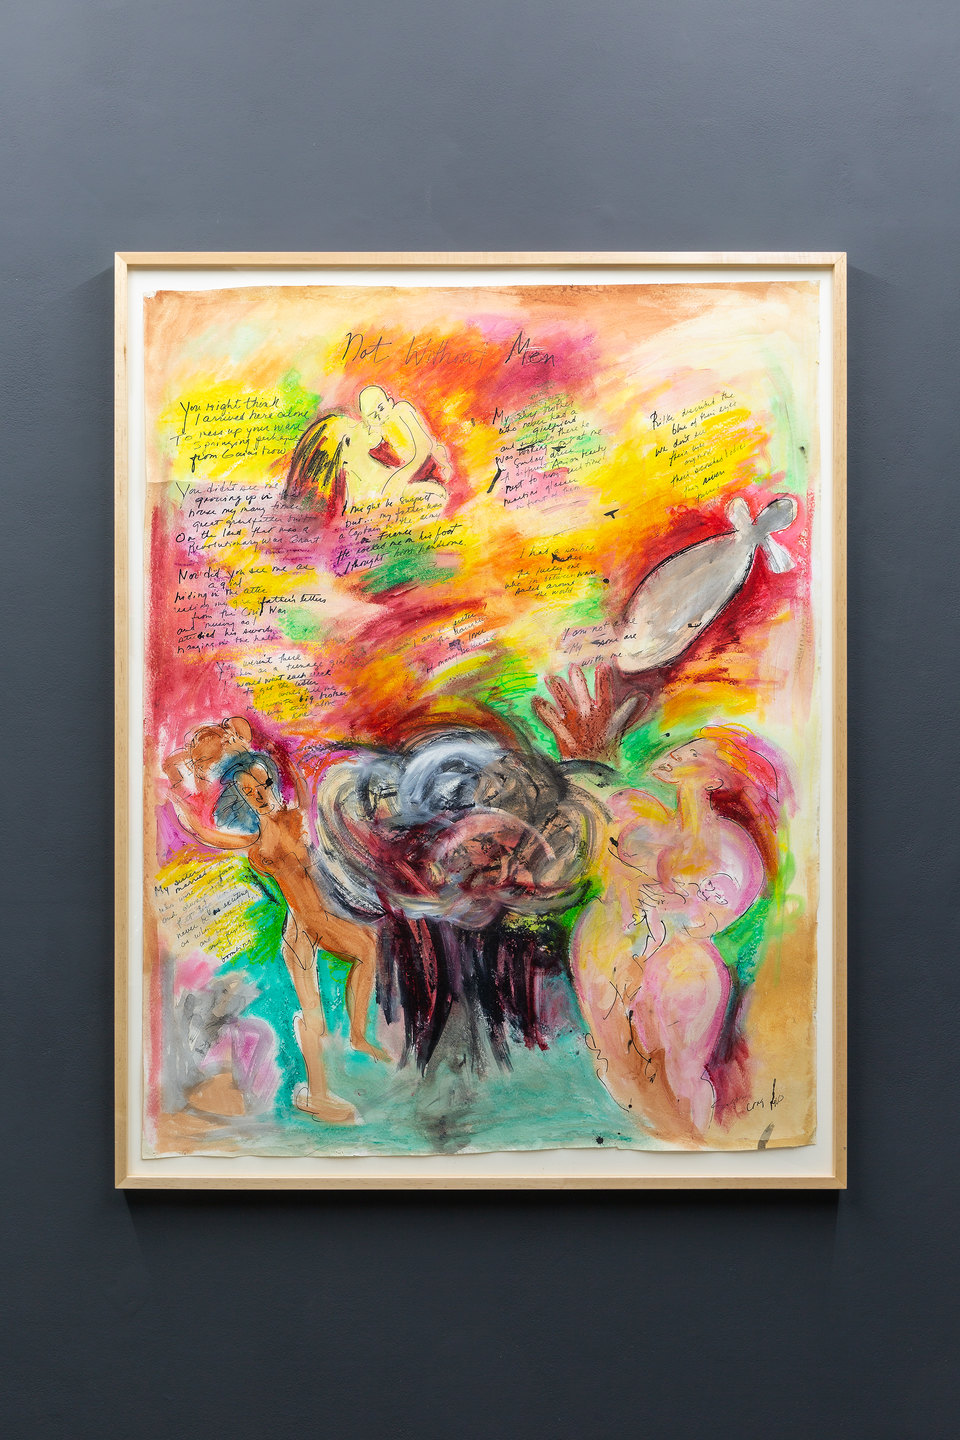 Suzanne Long, 'Not without Men', c. 1962, Watercolour, 156 x 122cm, Shit and Doom - NO!art, 2019, Cell Project Space